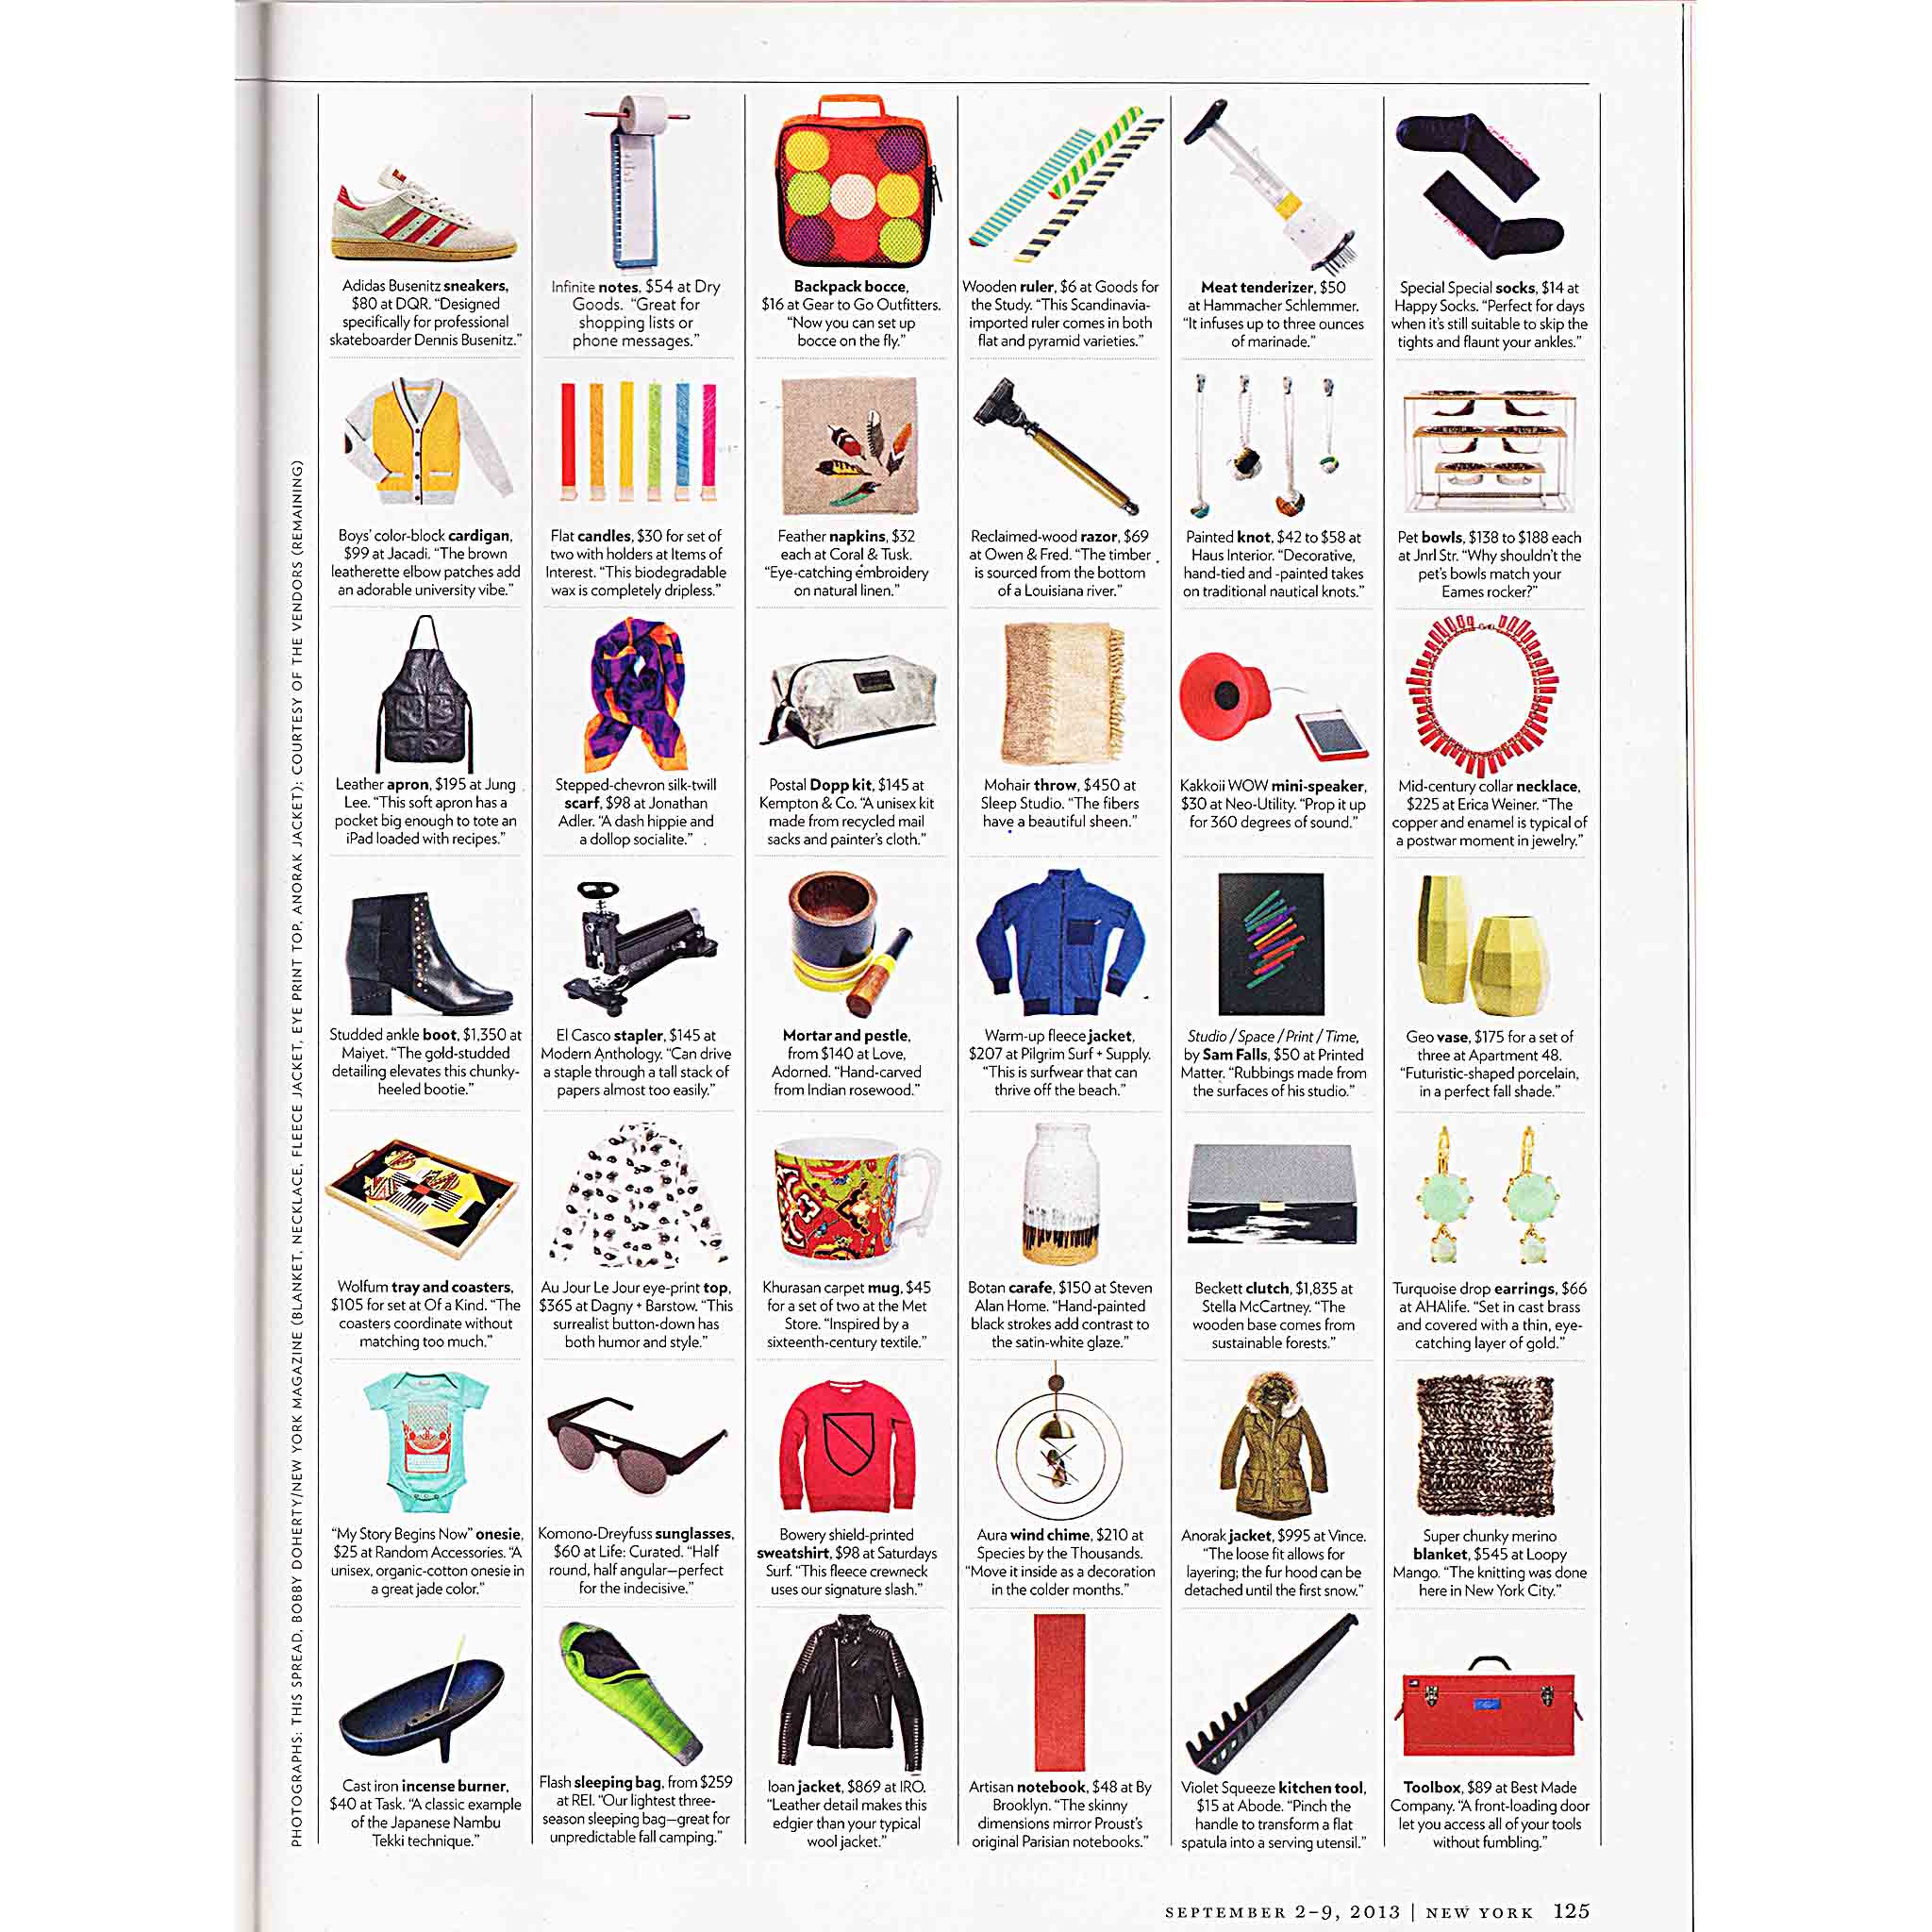 New York Magazine 2013 Fall Preview  The Cut: Fall Preview 2013 The 50 Finest: NYC Retailers Pick Their Favorite Fall Arrivals by Jessica Silvester and Emma Whitford, AUGUST 25, 2013.